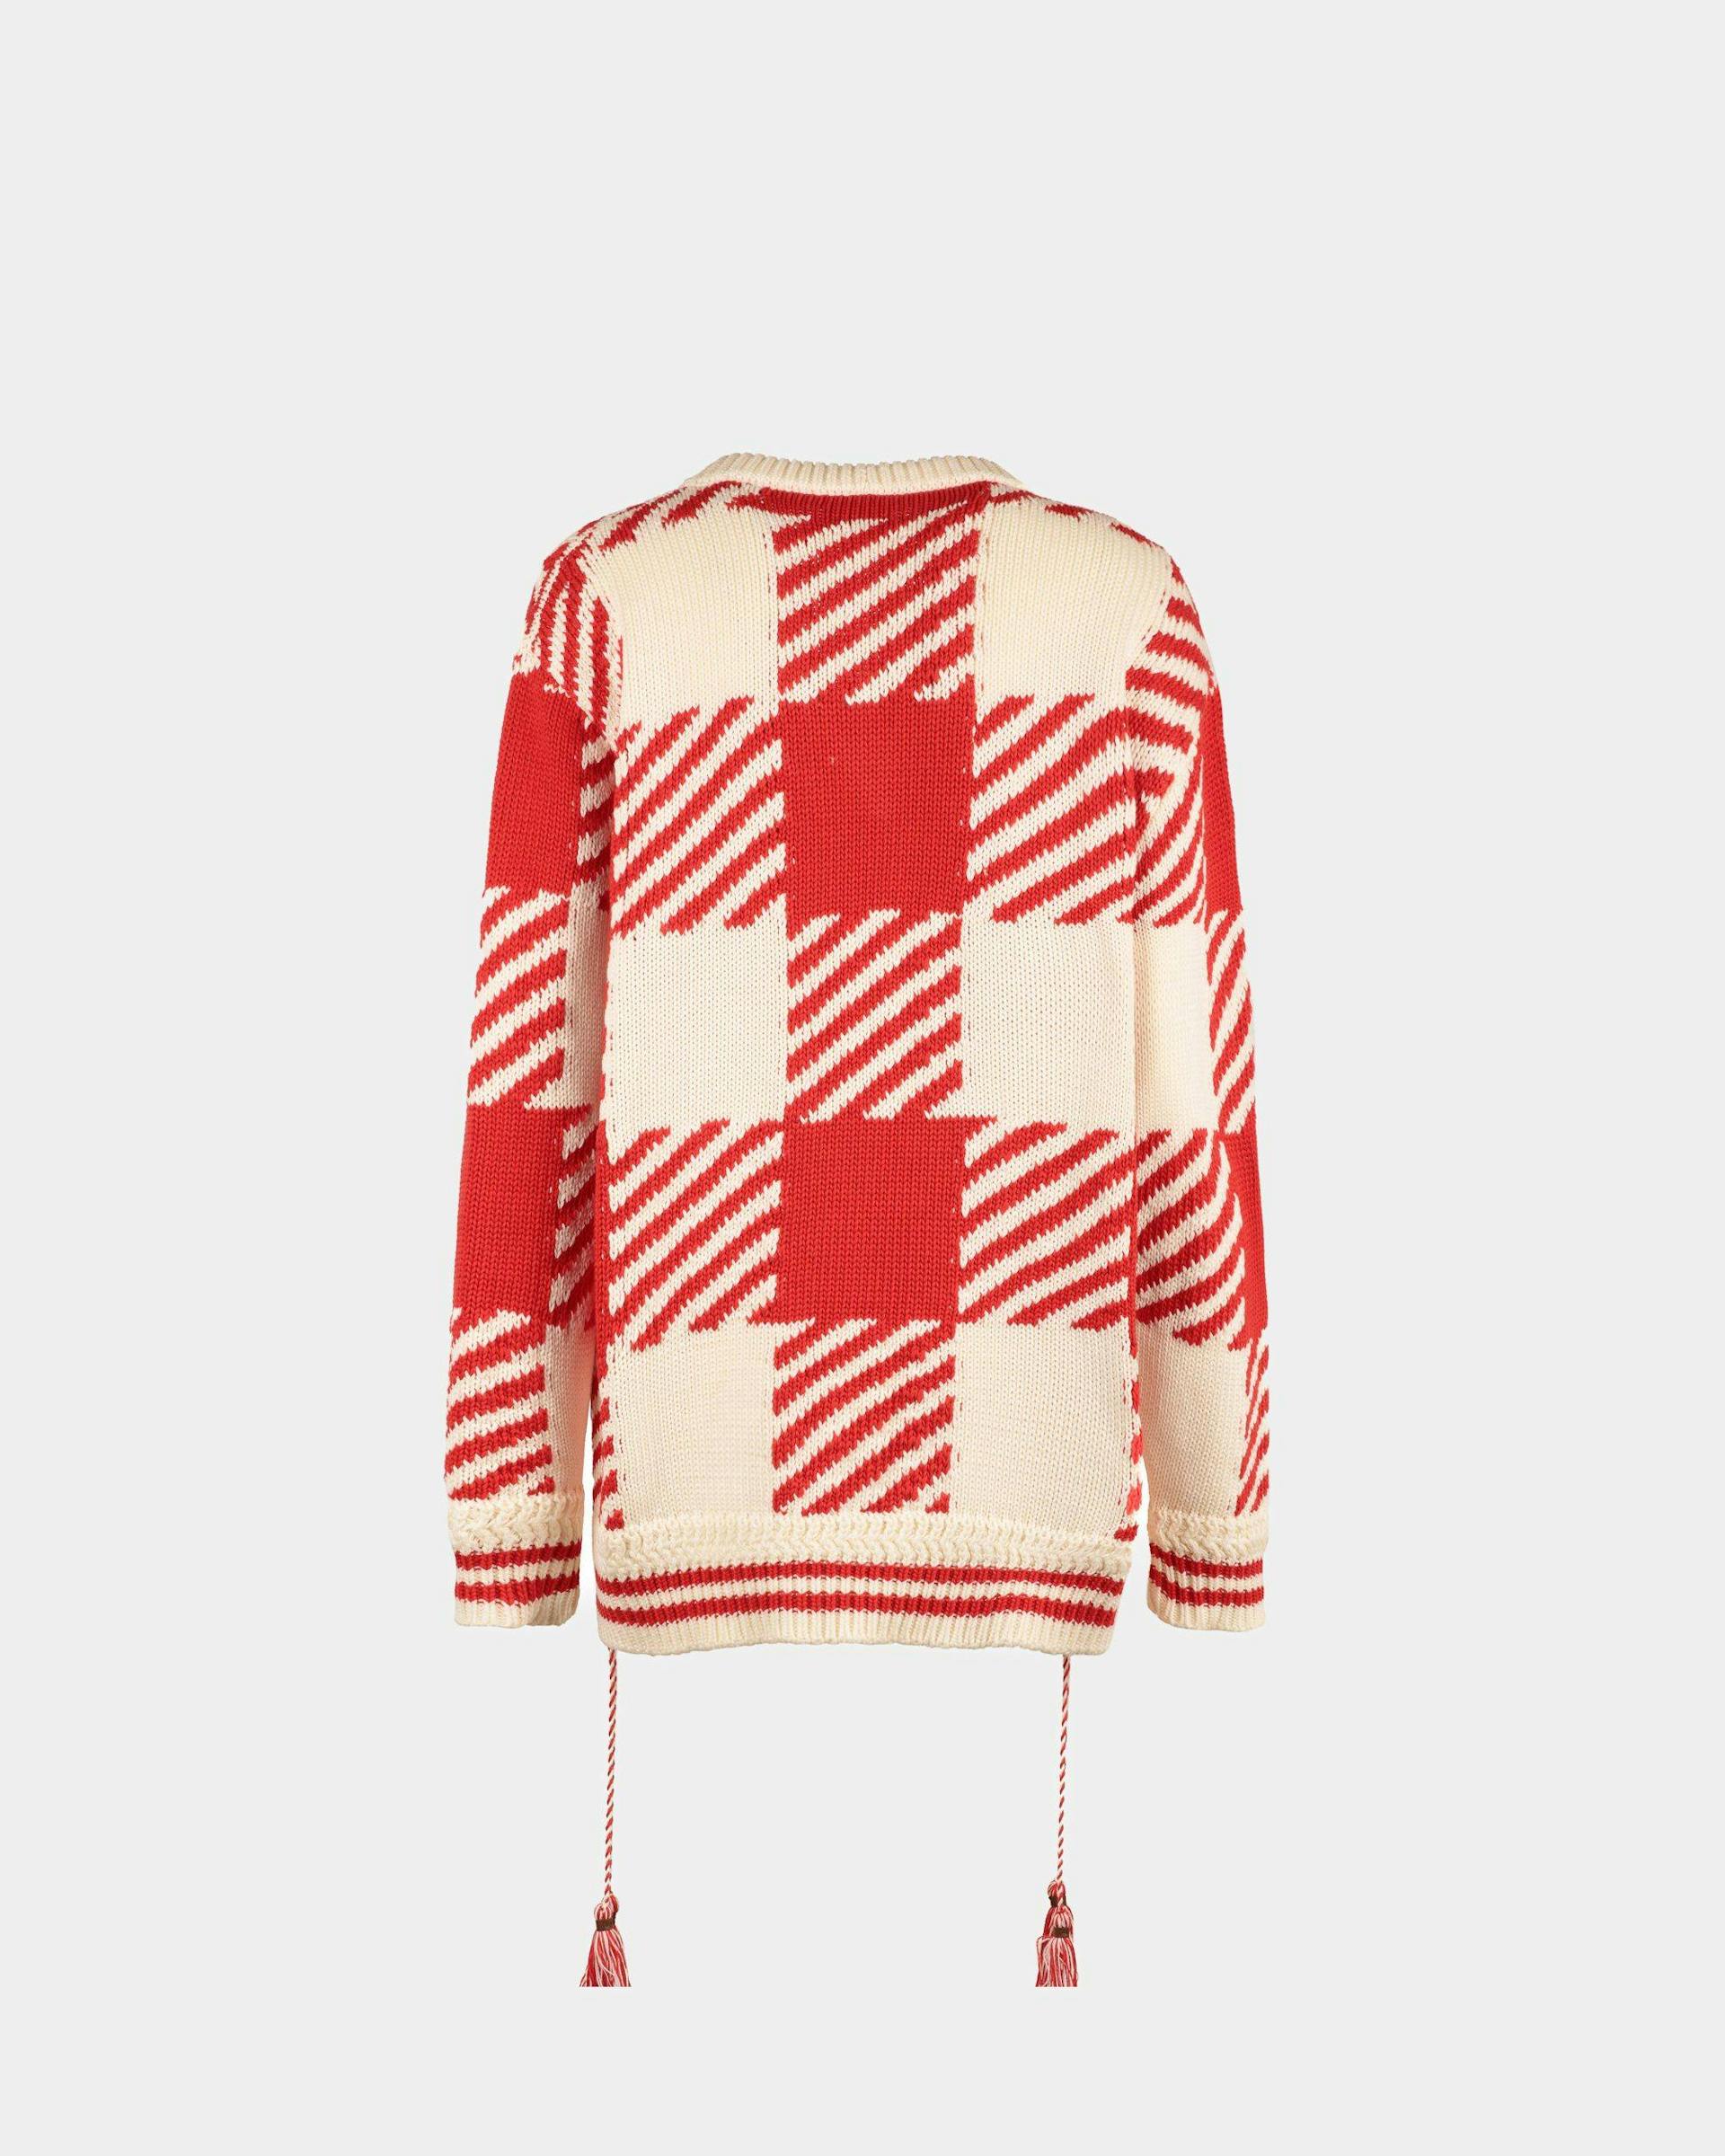 Women's V-Neck Sweater In Beige And Red Cotton | Bally | Still Life Back